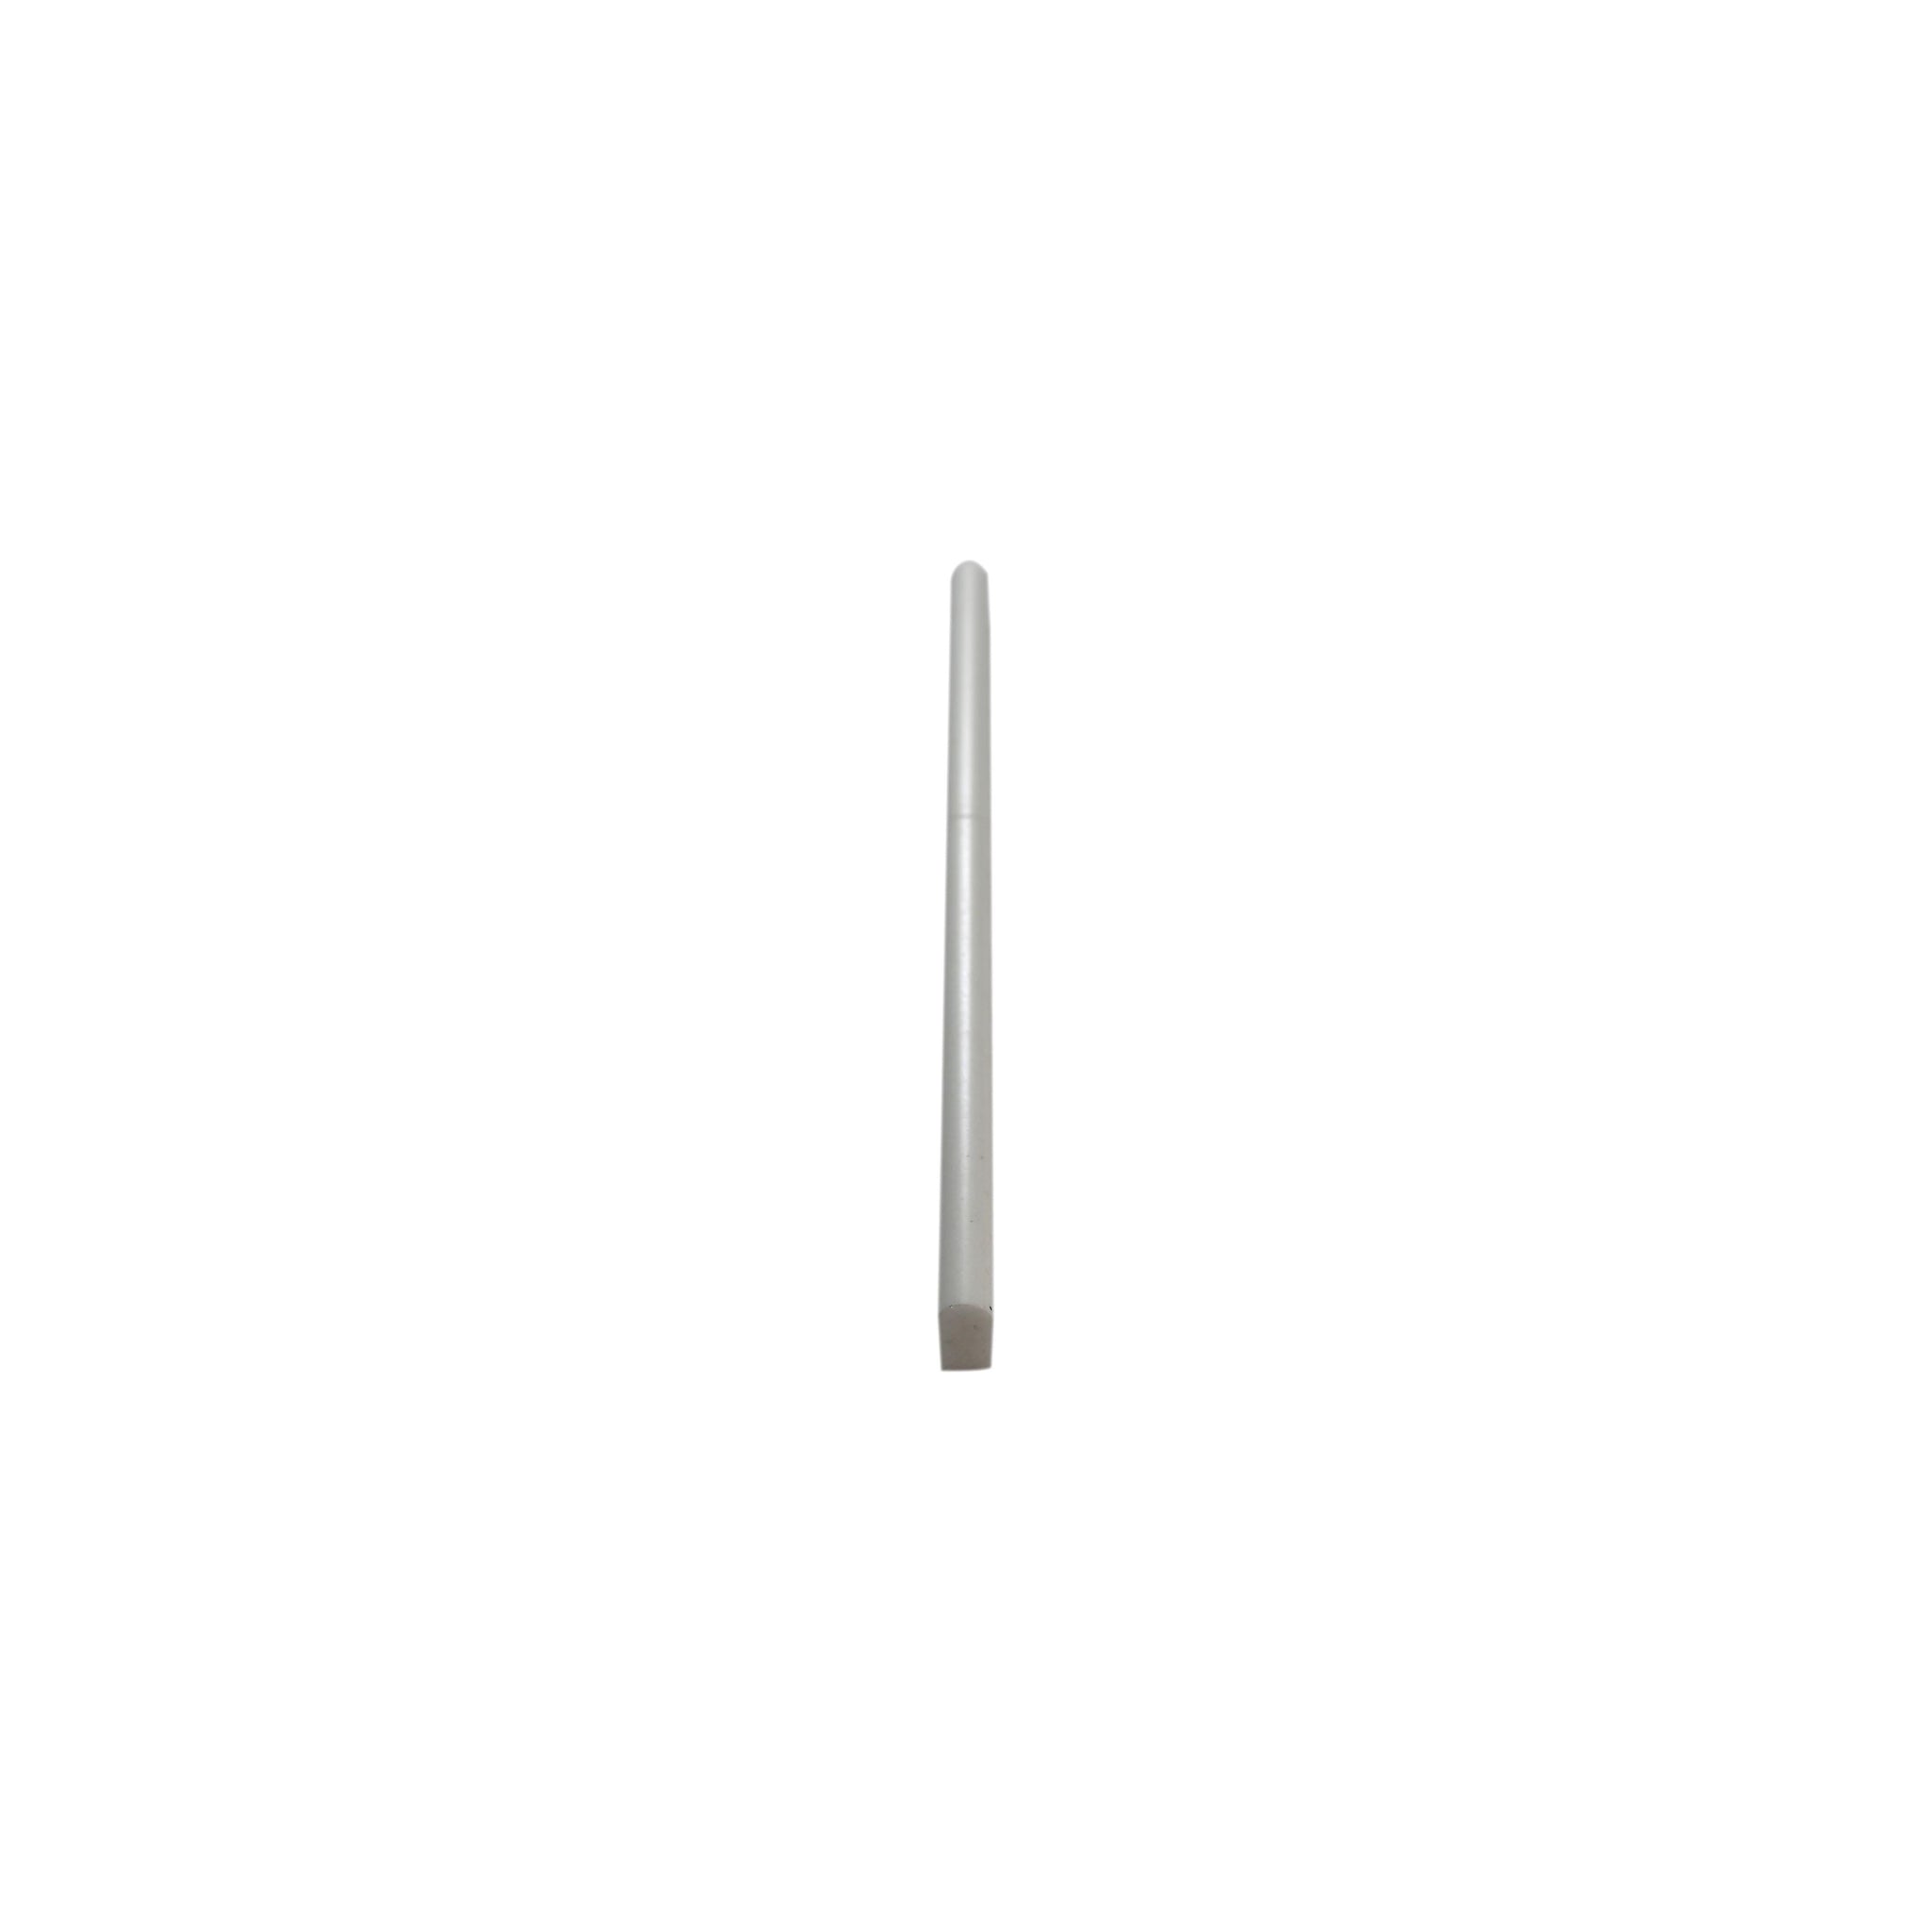 Thassos Marble 5/8''x12 ‘’ Pencil Polished